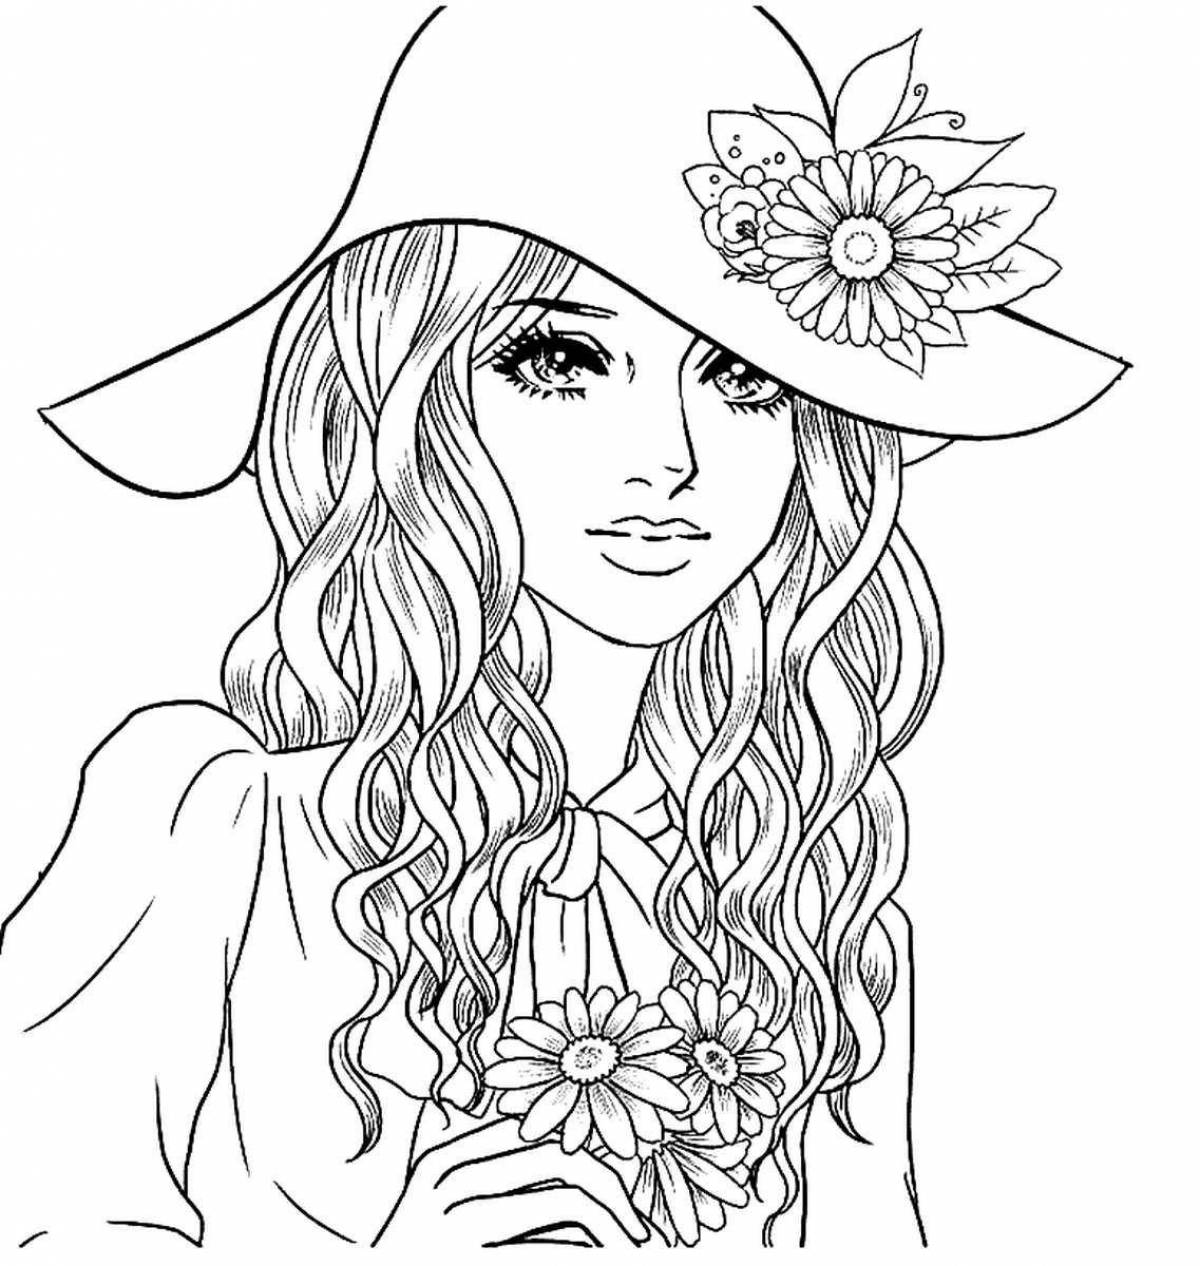 Amazing coloring pages for girls 13 years old